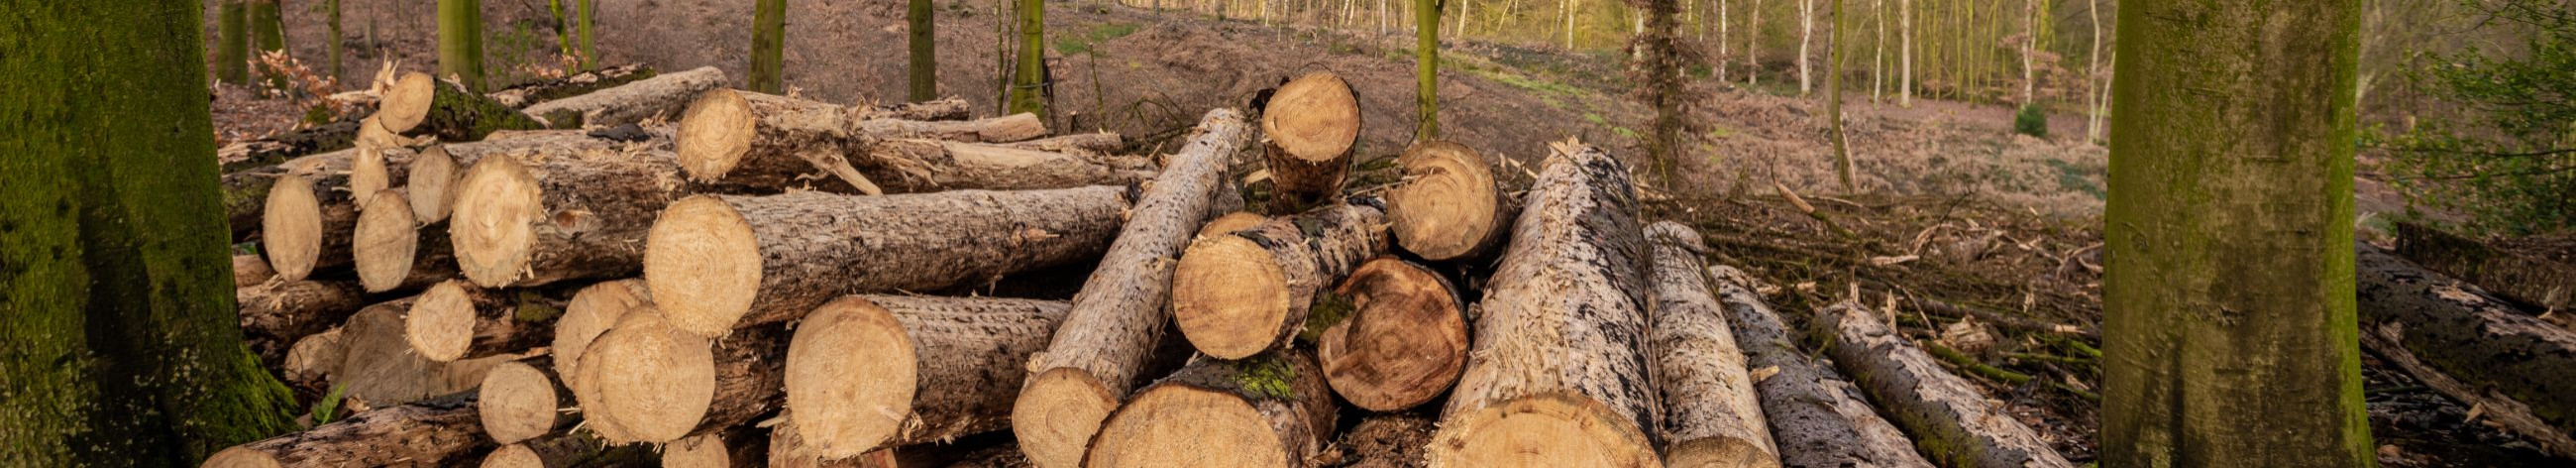 Wood and Paper Industry, buying-in and selling of wood, Materials for forest trees, Planting of forest, Sanitary cutting, Harvesting, establishment of forest crops, purchase of forest properties - sale, harvesting, cleaning of trench pervades